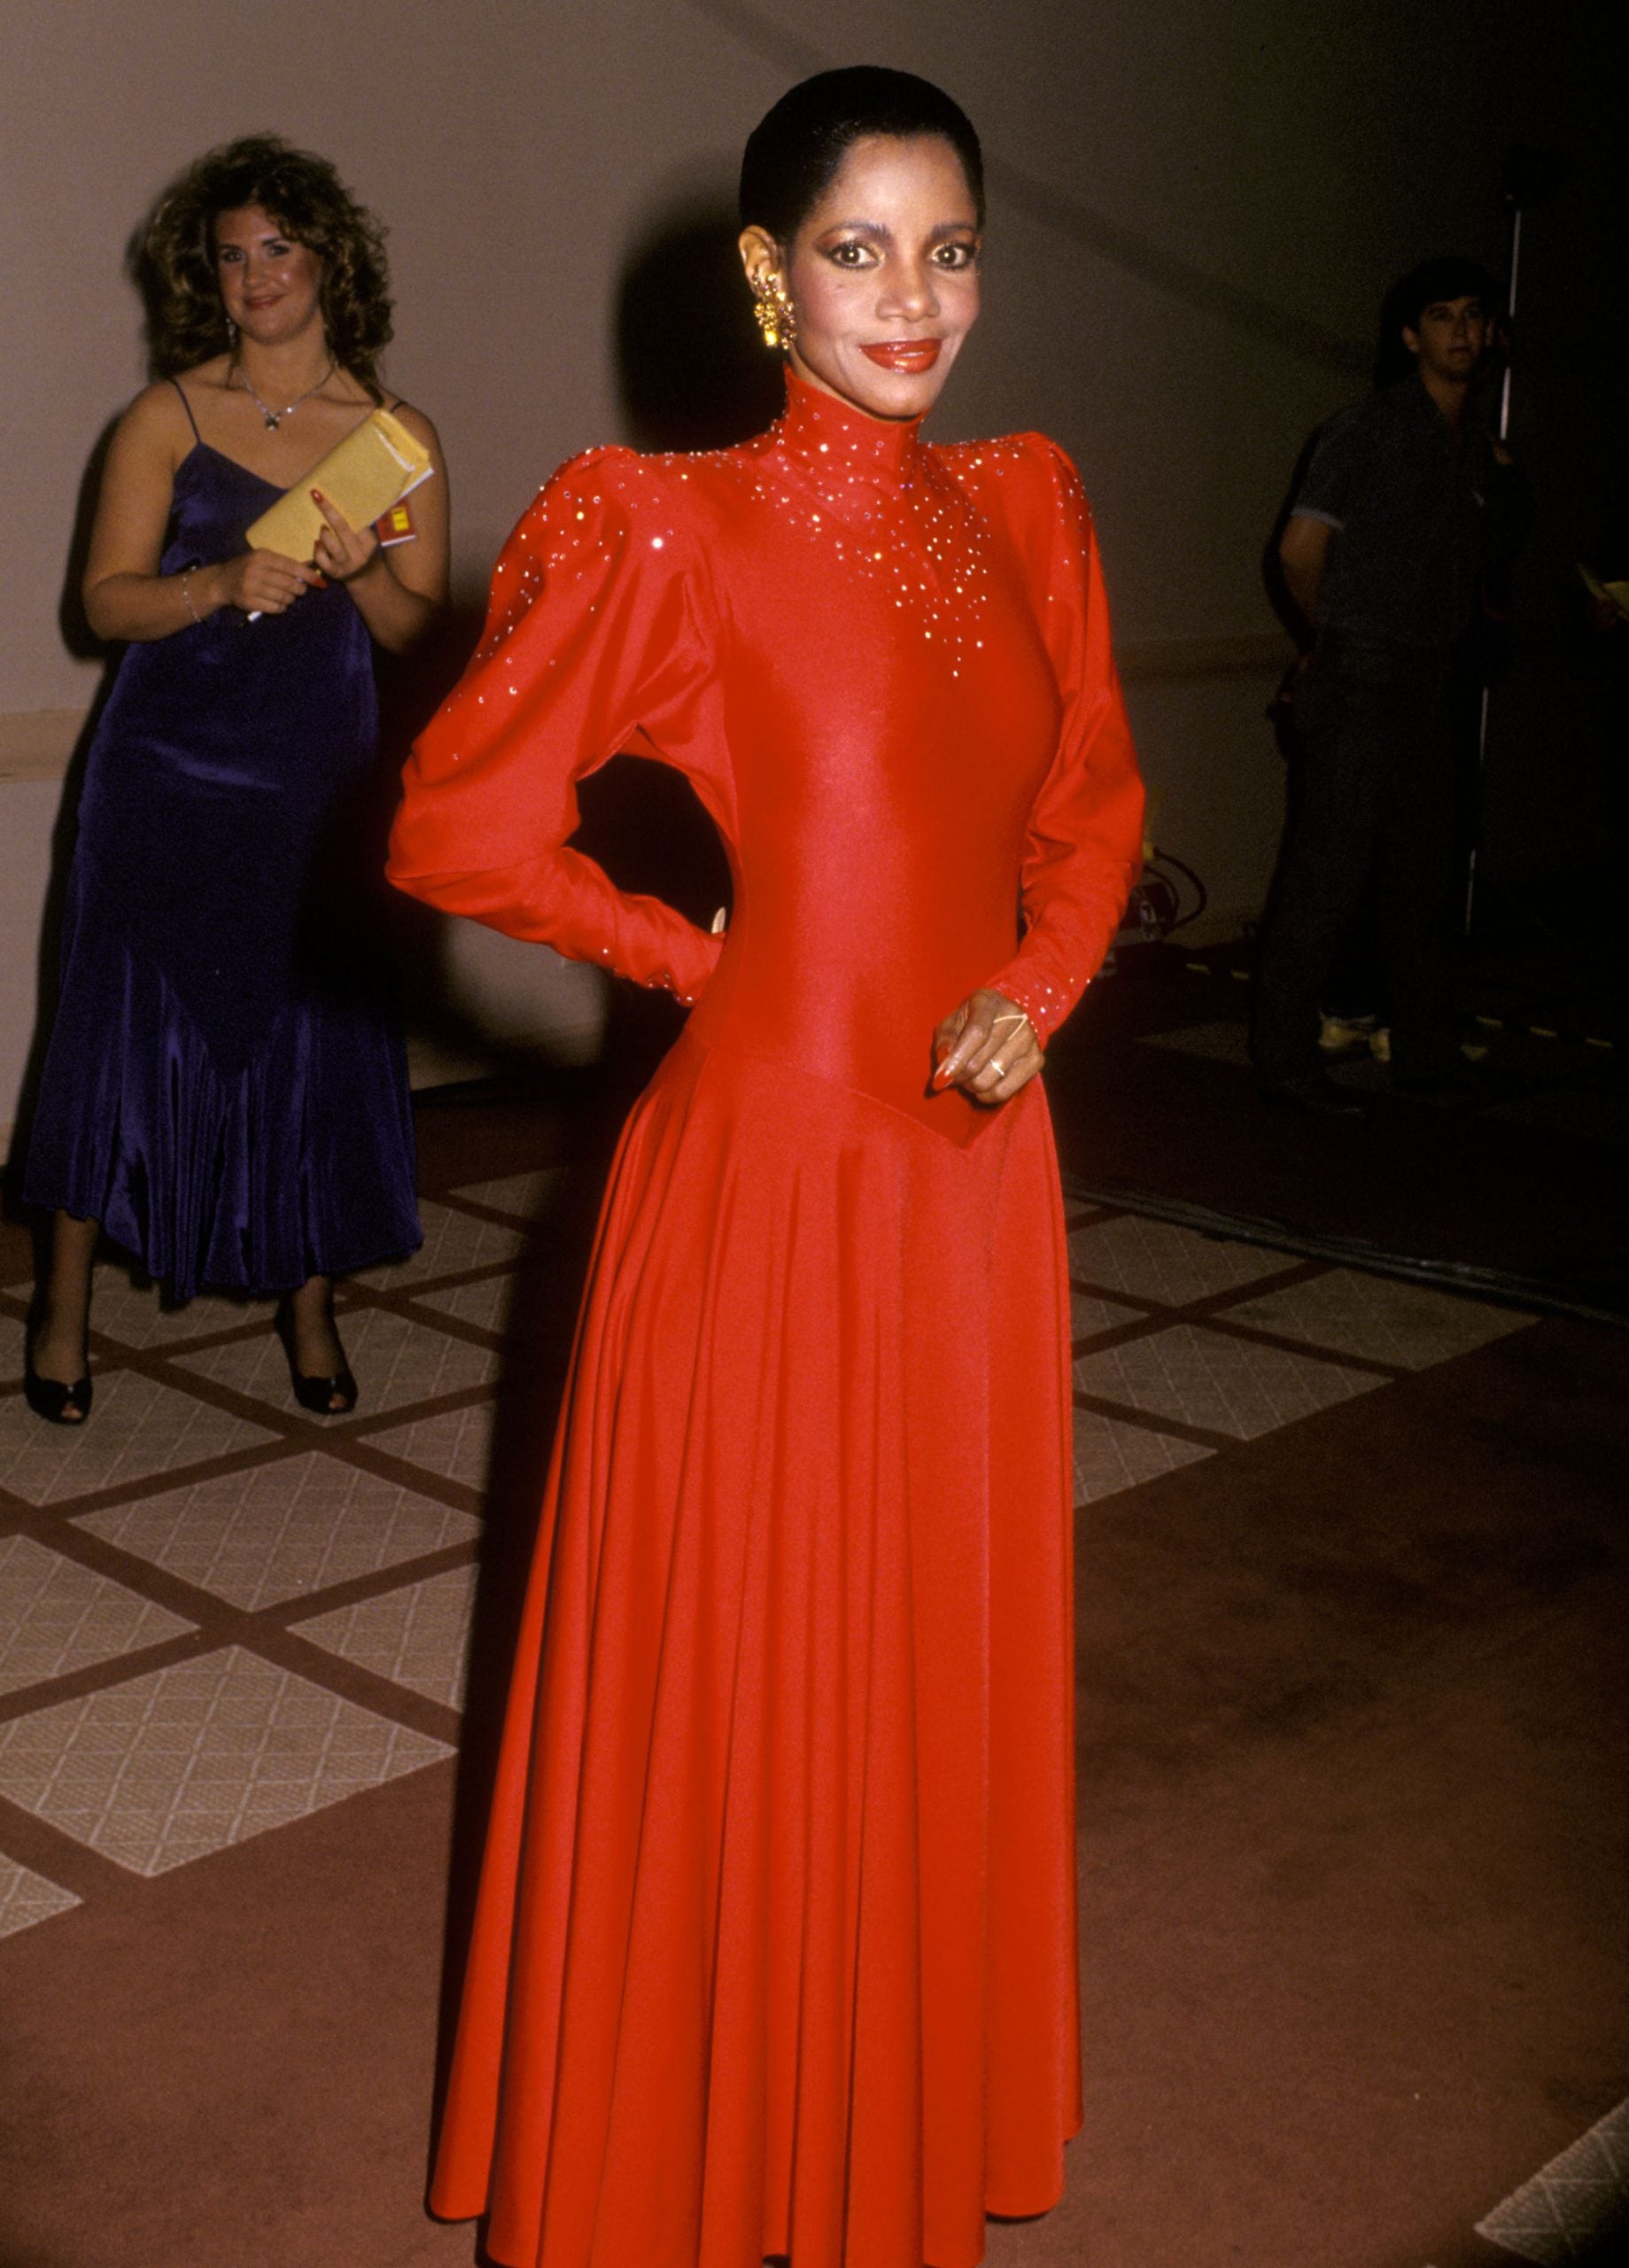 The Most Glamorous Golden Globe Red Carpet Looks Throughout The Years